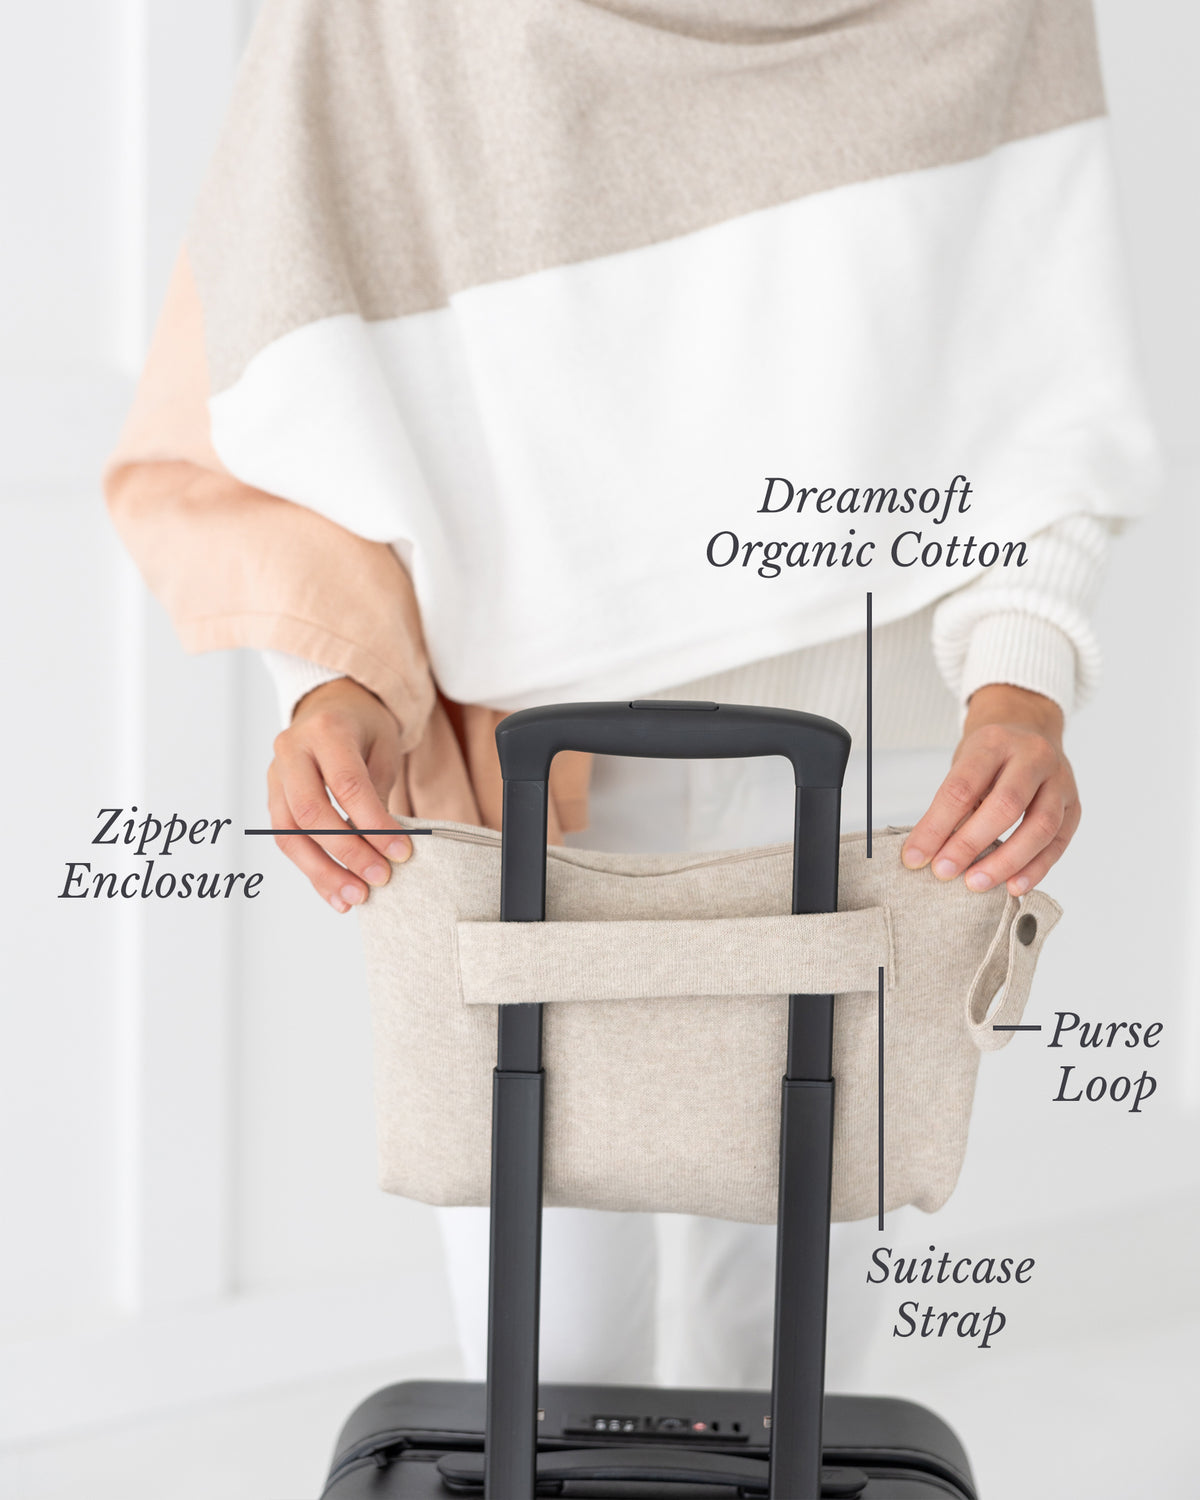 Woman holding Birch Carry Pouch which is a beige zipper pouch that can hold the Dreamsoft Travel Scarf over handle on suitcase- Features shown are Zipper Enclosure, Purse Loop and Suitcase Strap